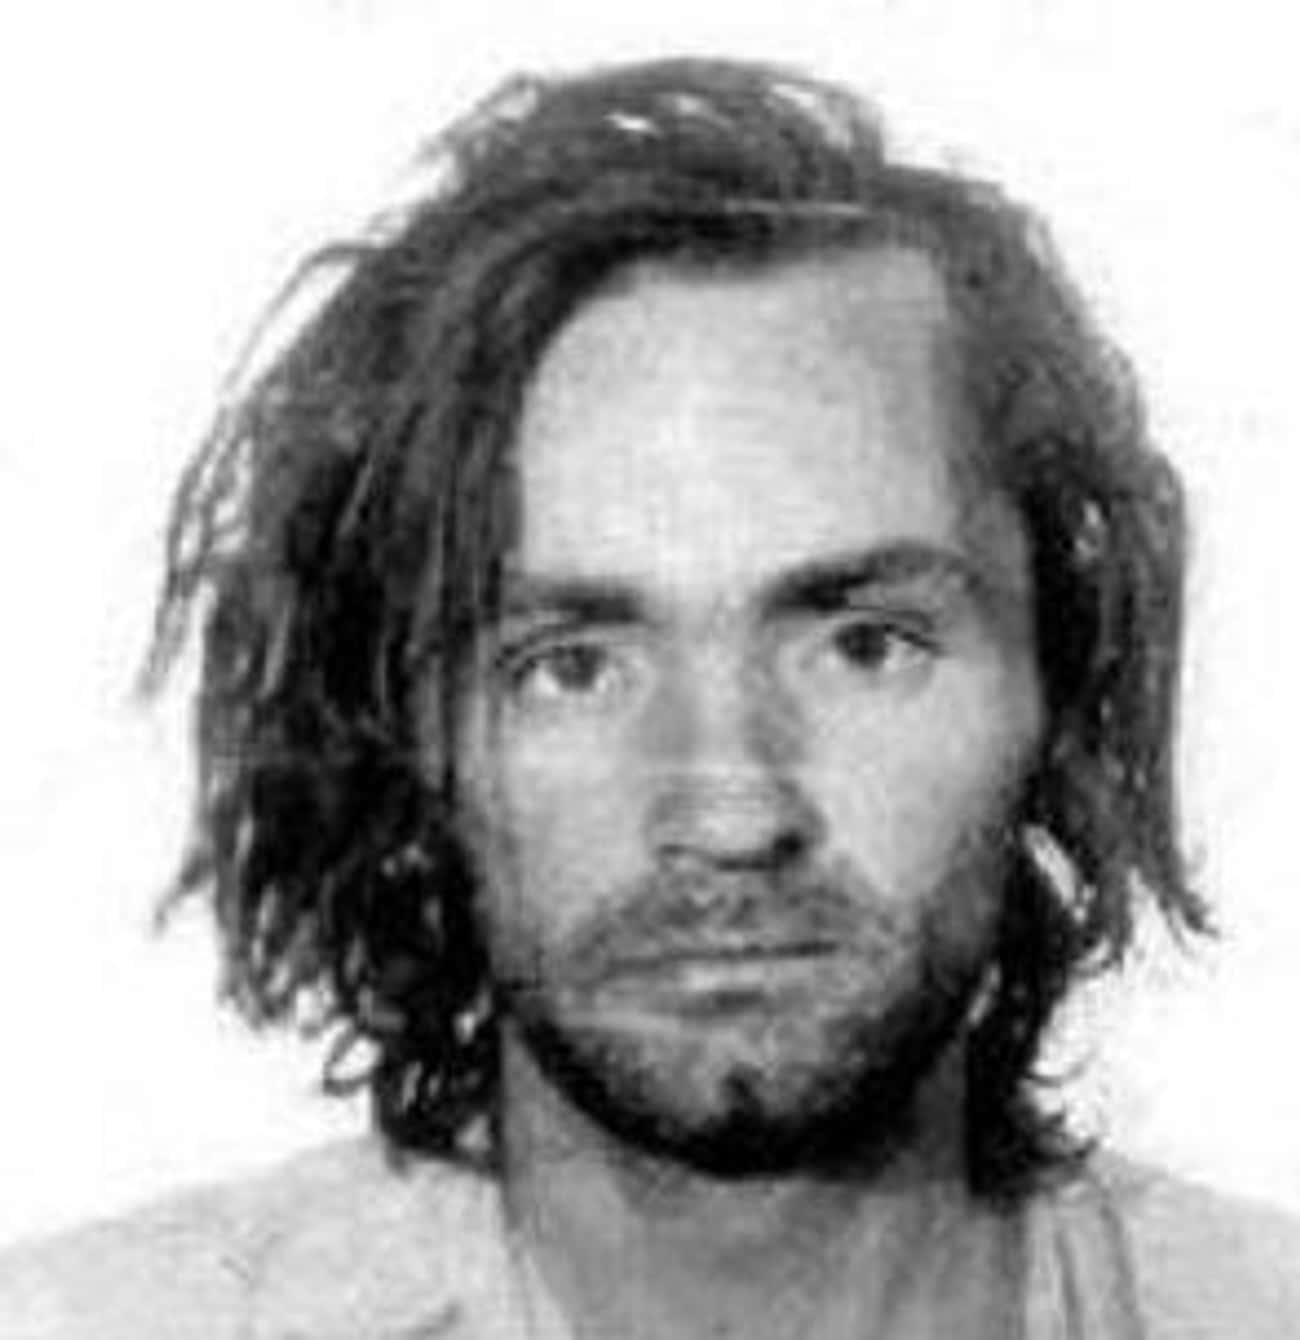 Charles Manson Used Bizarre Occult Teachings To Turn The Hippy Dream Of A New World Into A Murder Spree